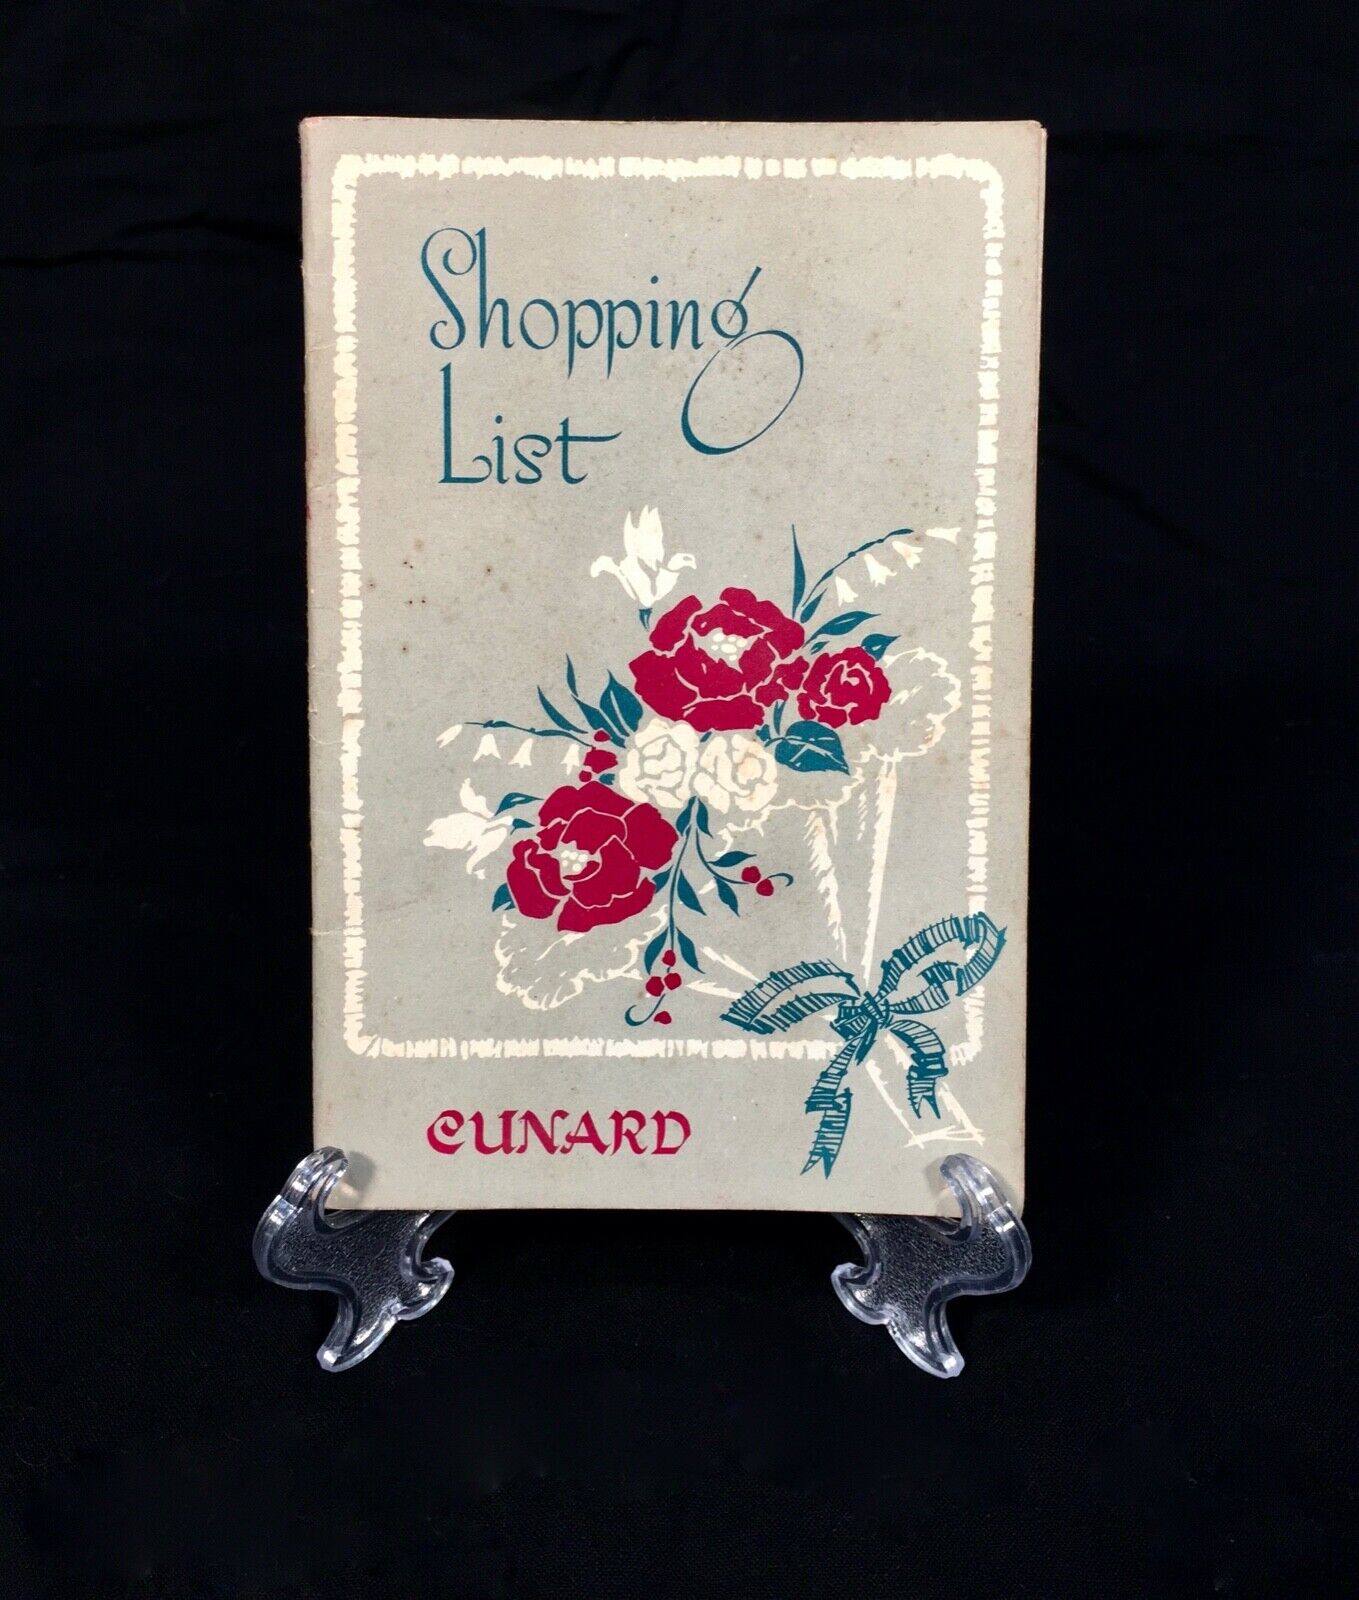 Antique Advertising - 1930s Cunard Ships Store on Board Shopping List Brochure